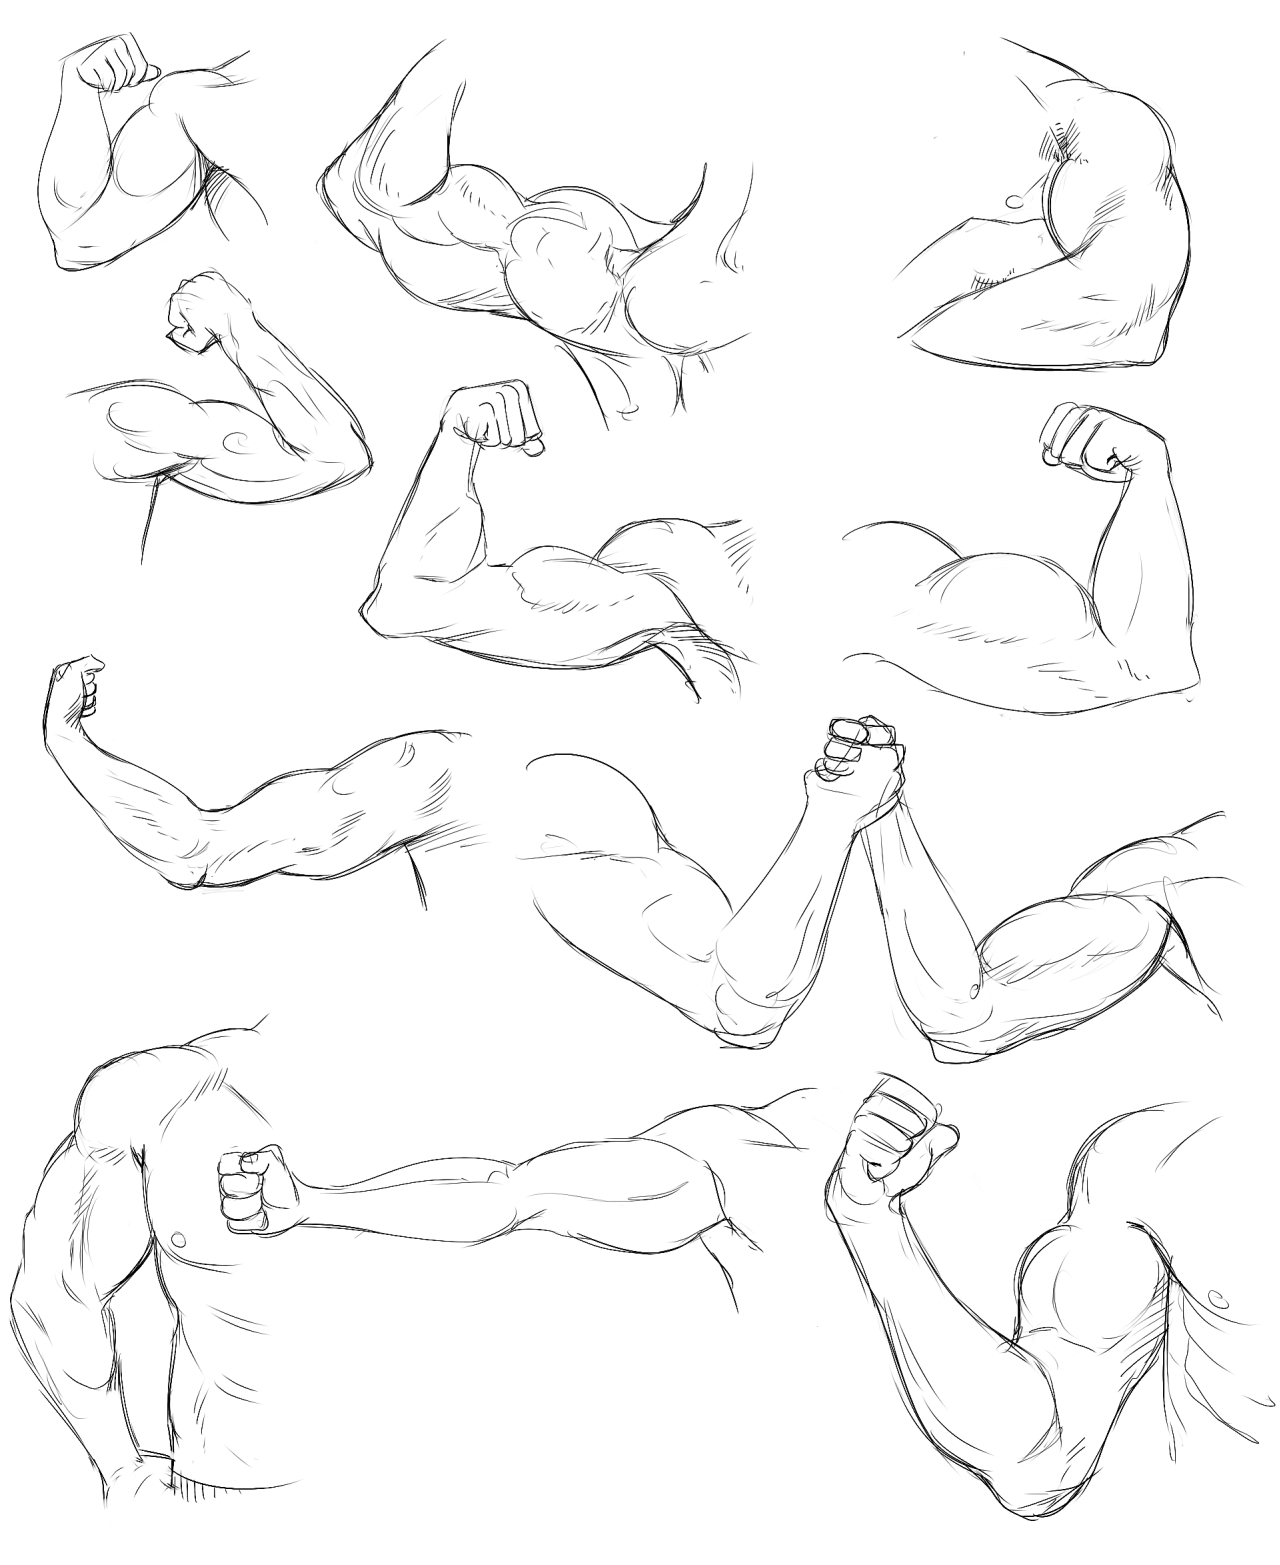 Arm Life Drawing Practice by Temiree on DeviantArt